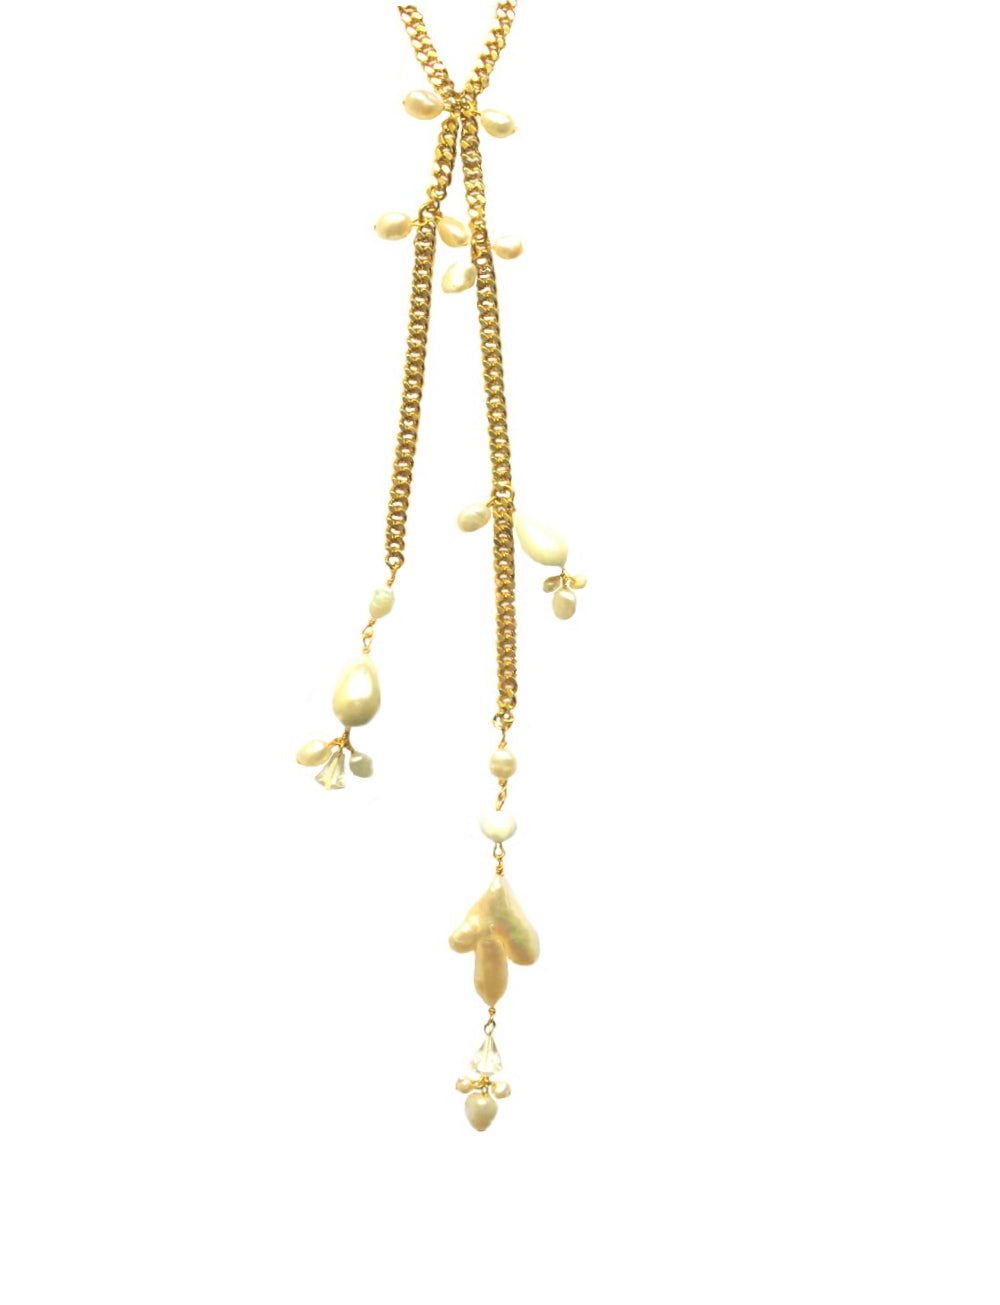 Pearls and Swarovski crystals Capri Necklace in Gold